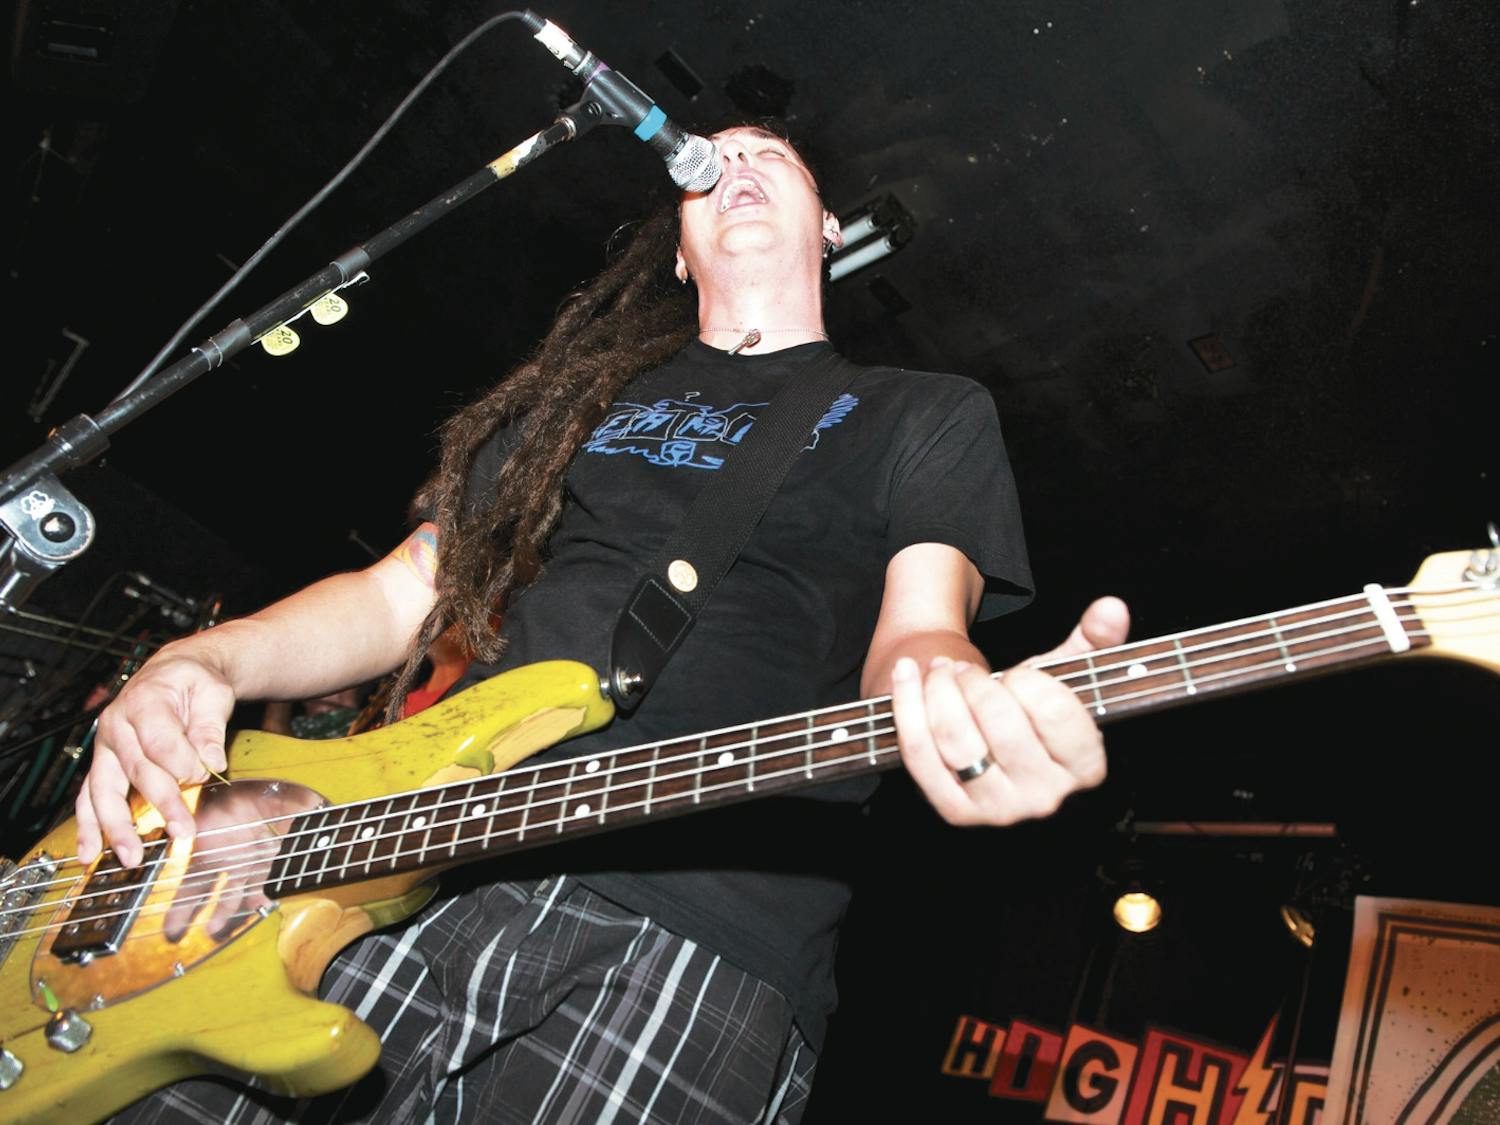 Less Than Jake vocalist and bassist Roger Manganelli plays at the High Dive during the band’s Wake and Bake event in 2012. The band will perform t at the High Dive Aug. 30-Aug. 31.